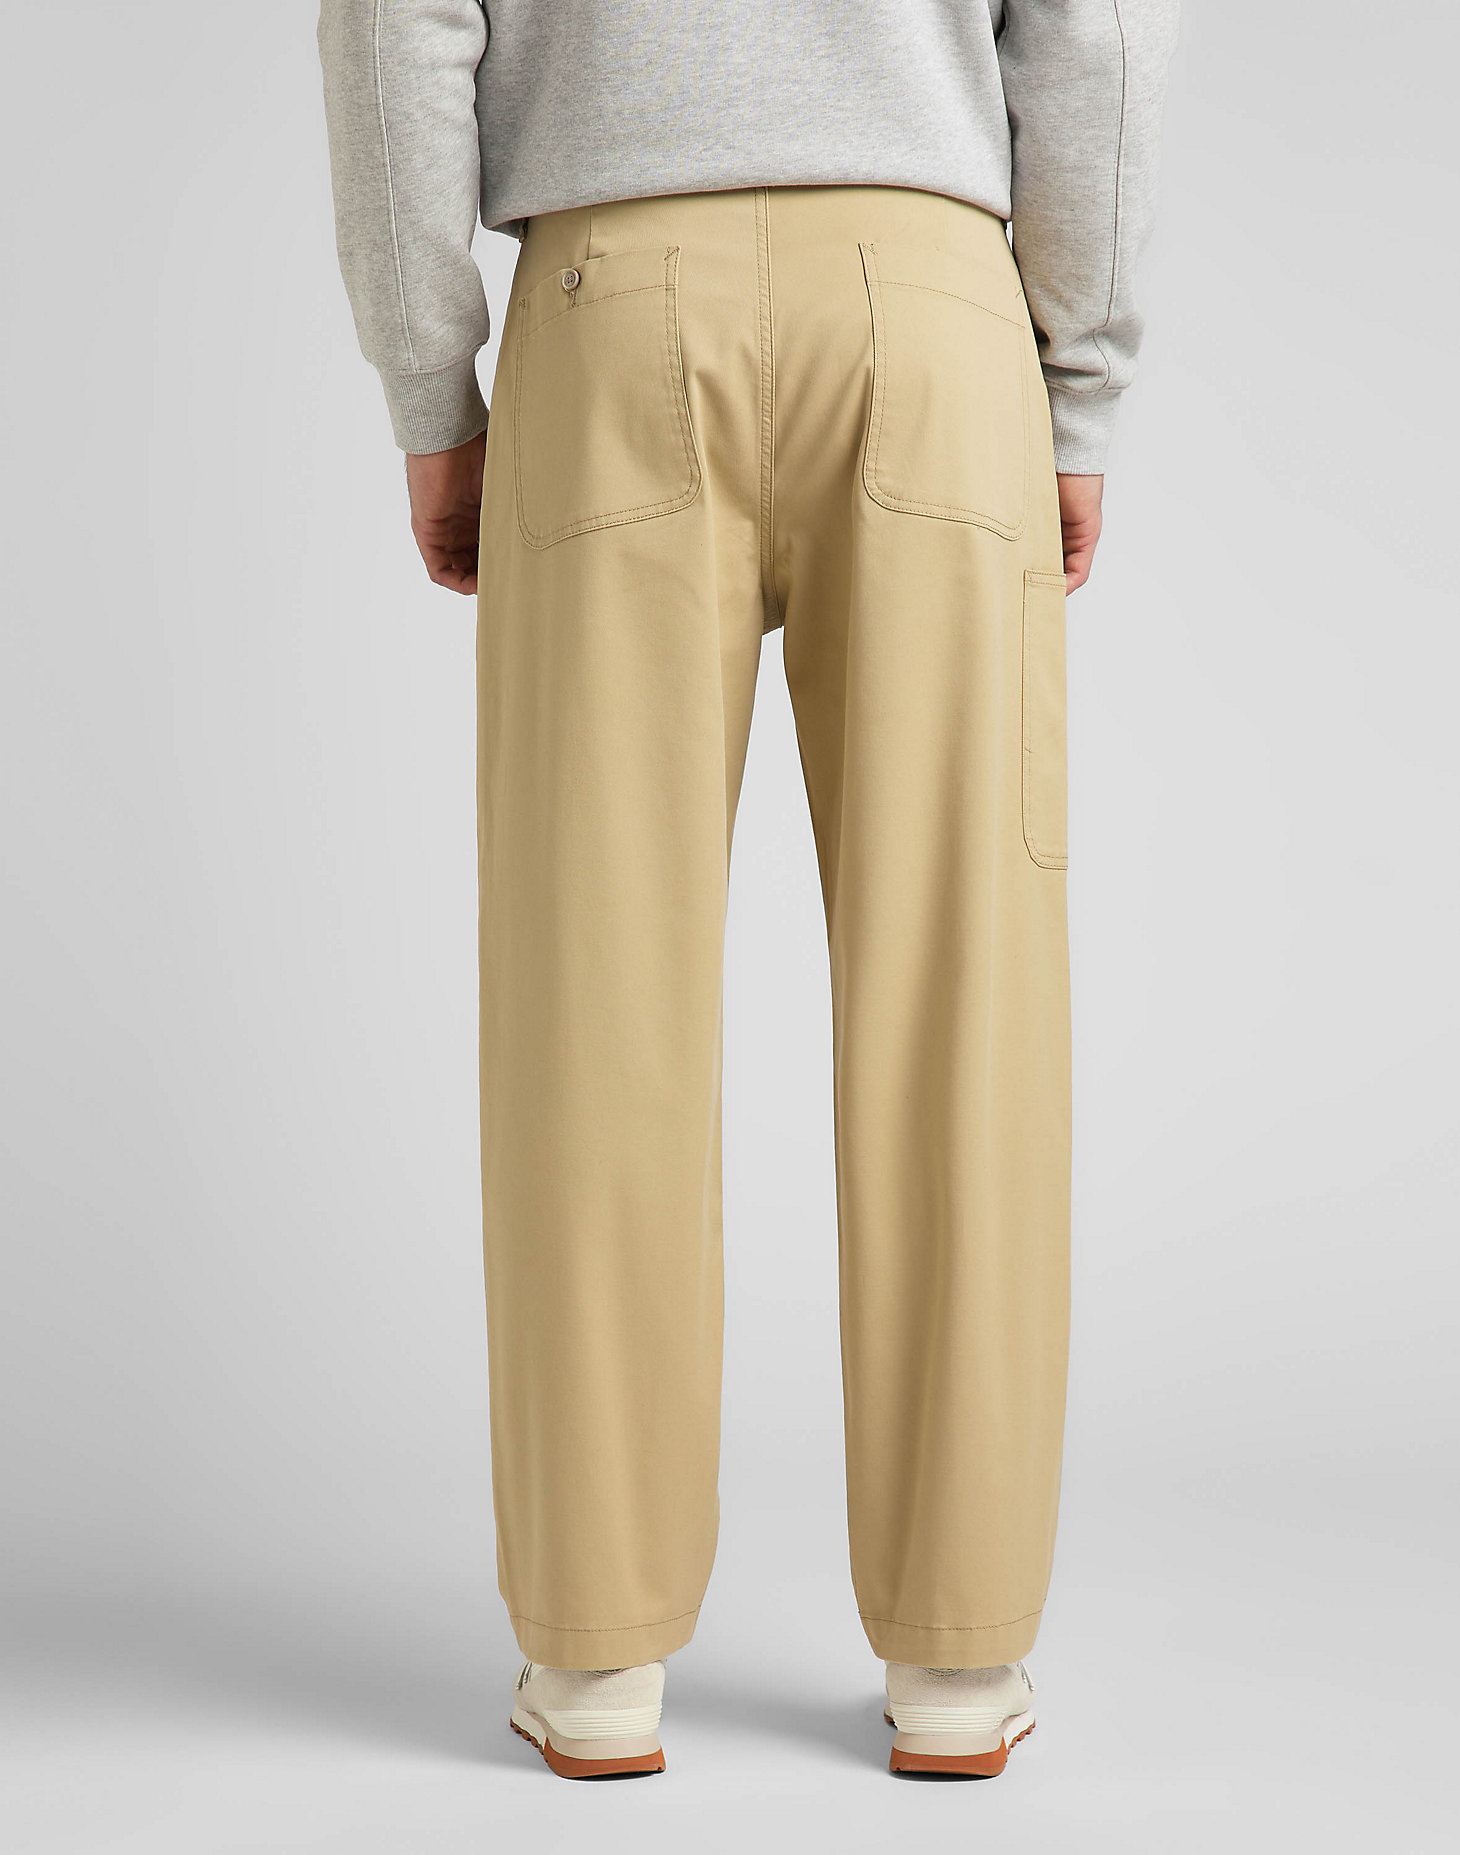 Loose Pleated Chino in Sand alternative view 1